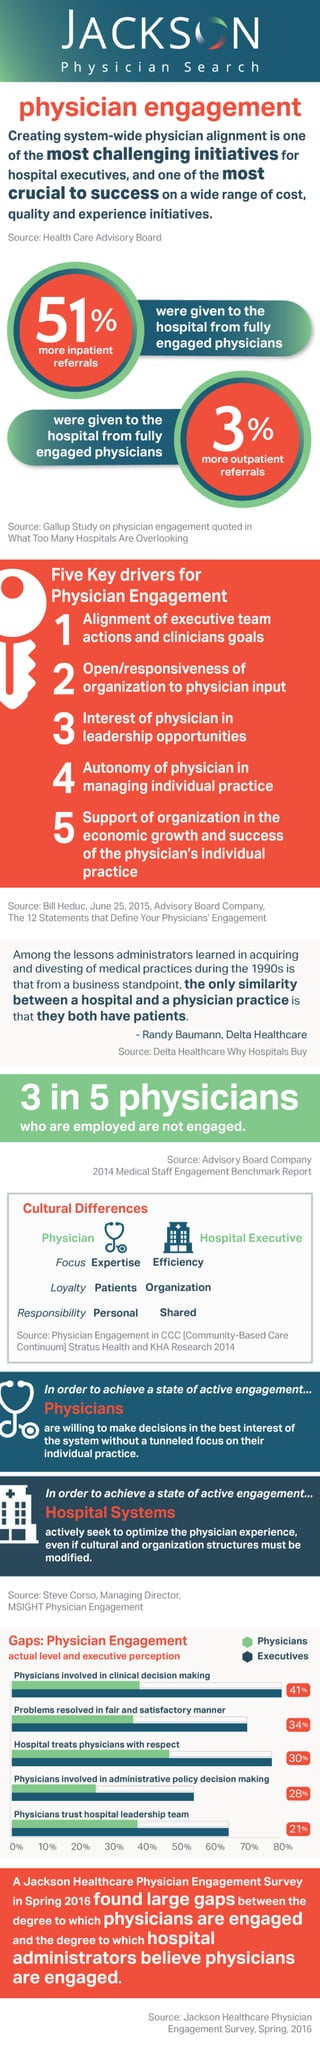 [Infographic Guide] Physician Trends - Physician Engagement